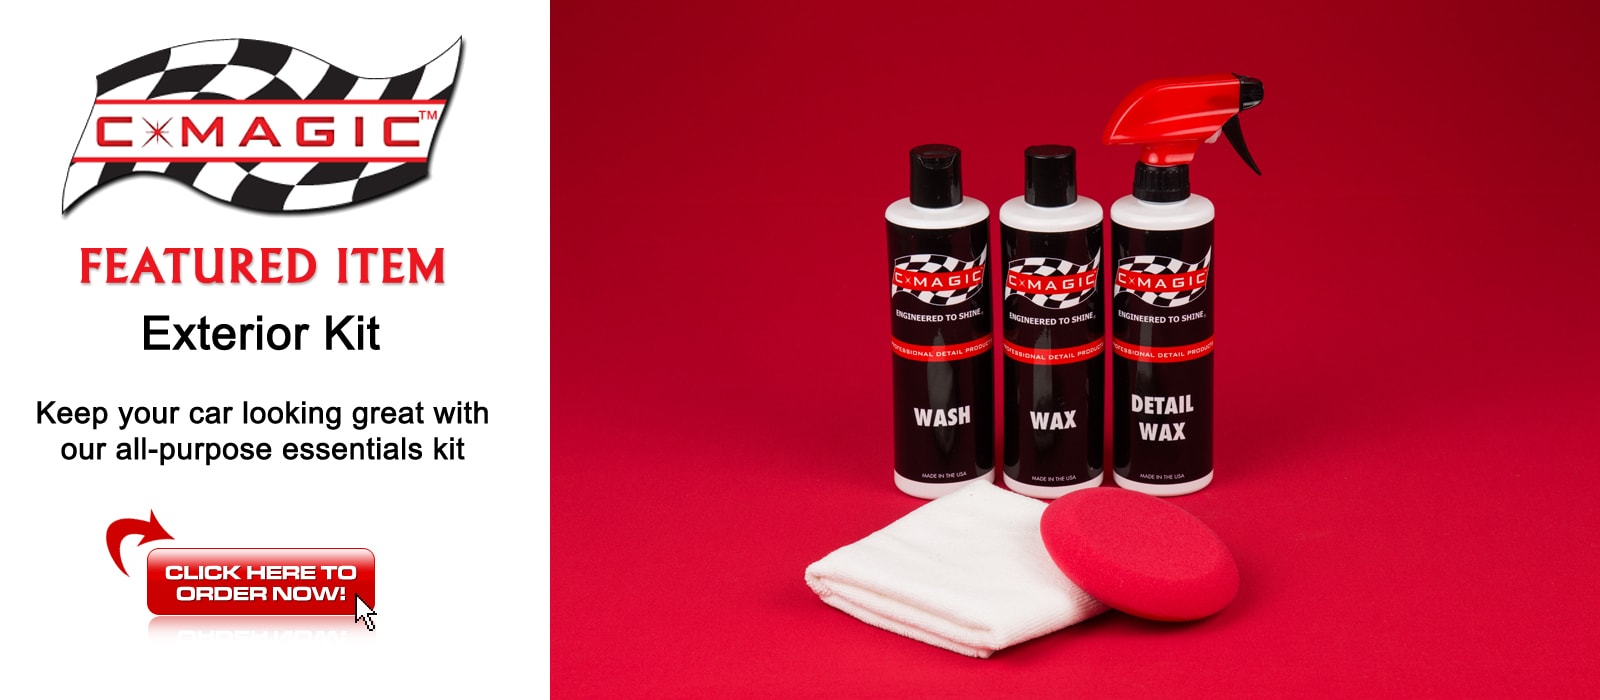 C-Magic Wax  Professional Quality Auto Wax and Detailing Products